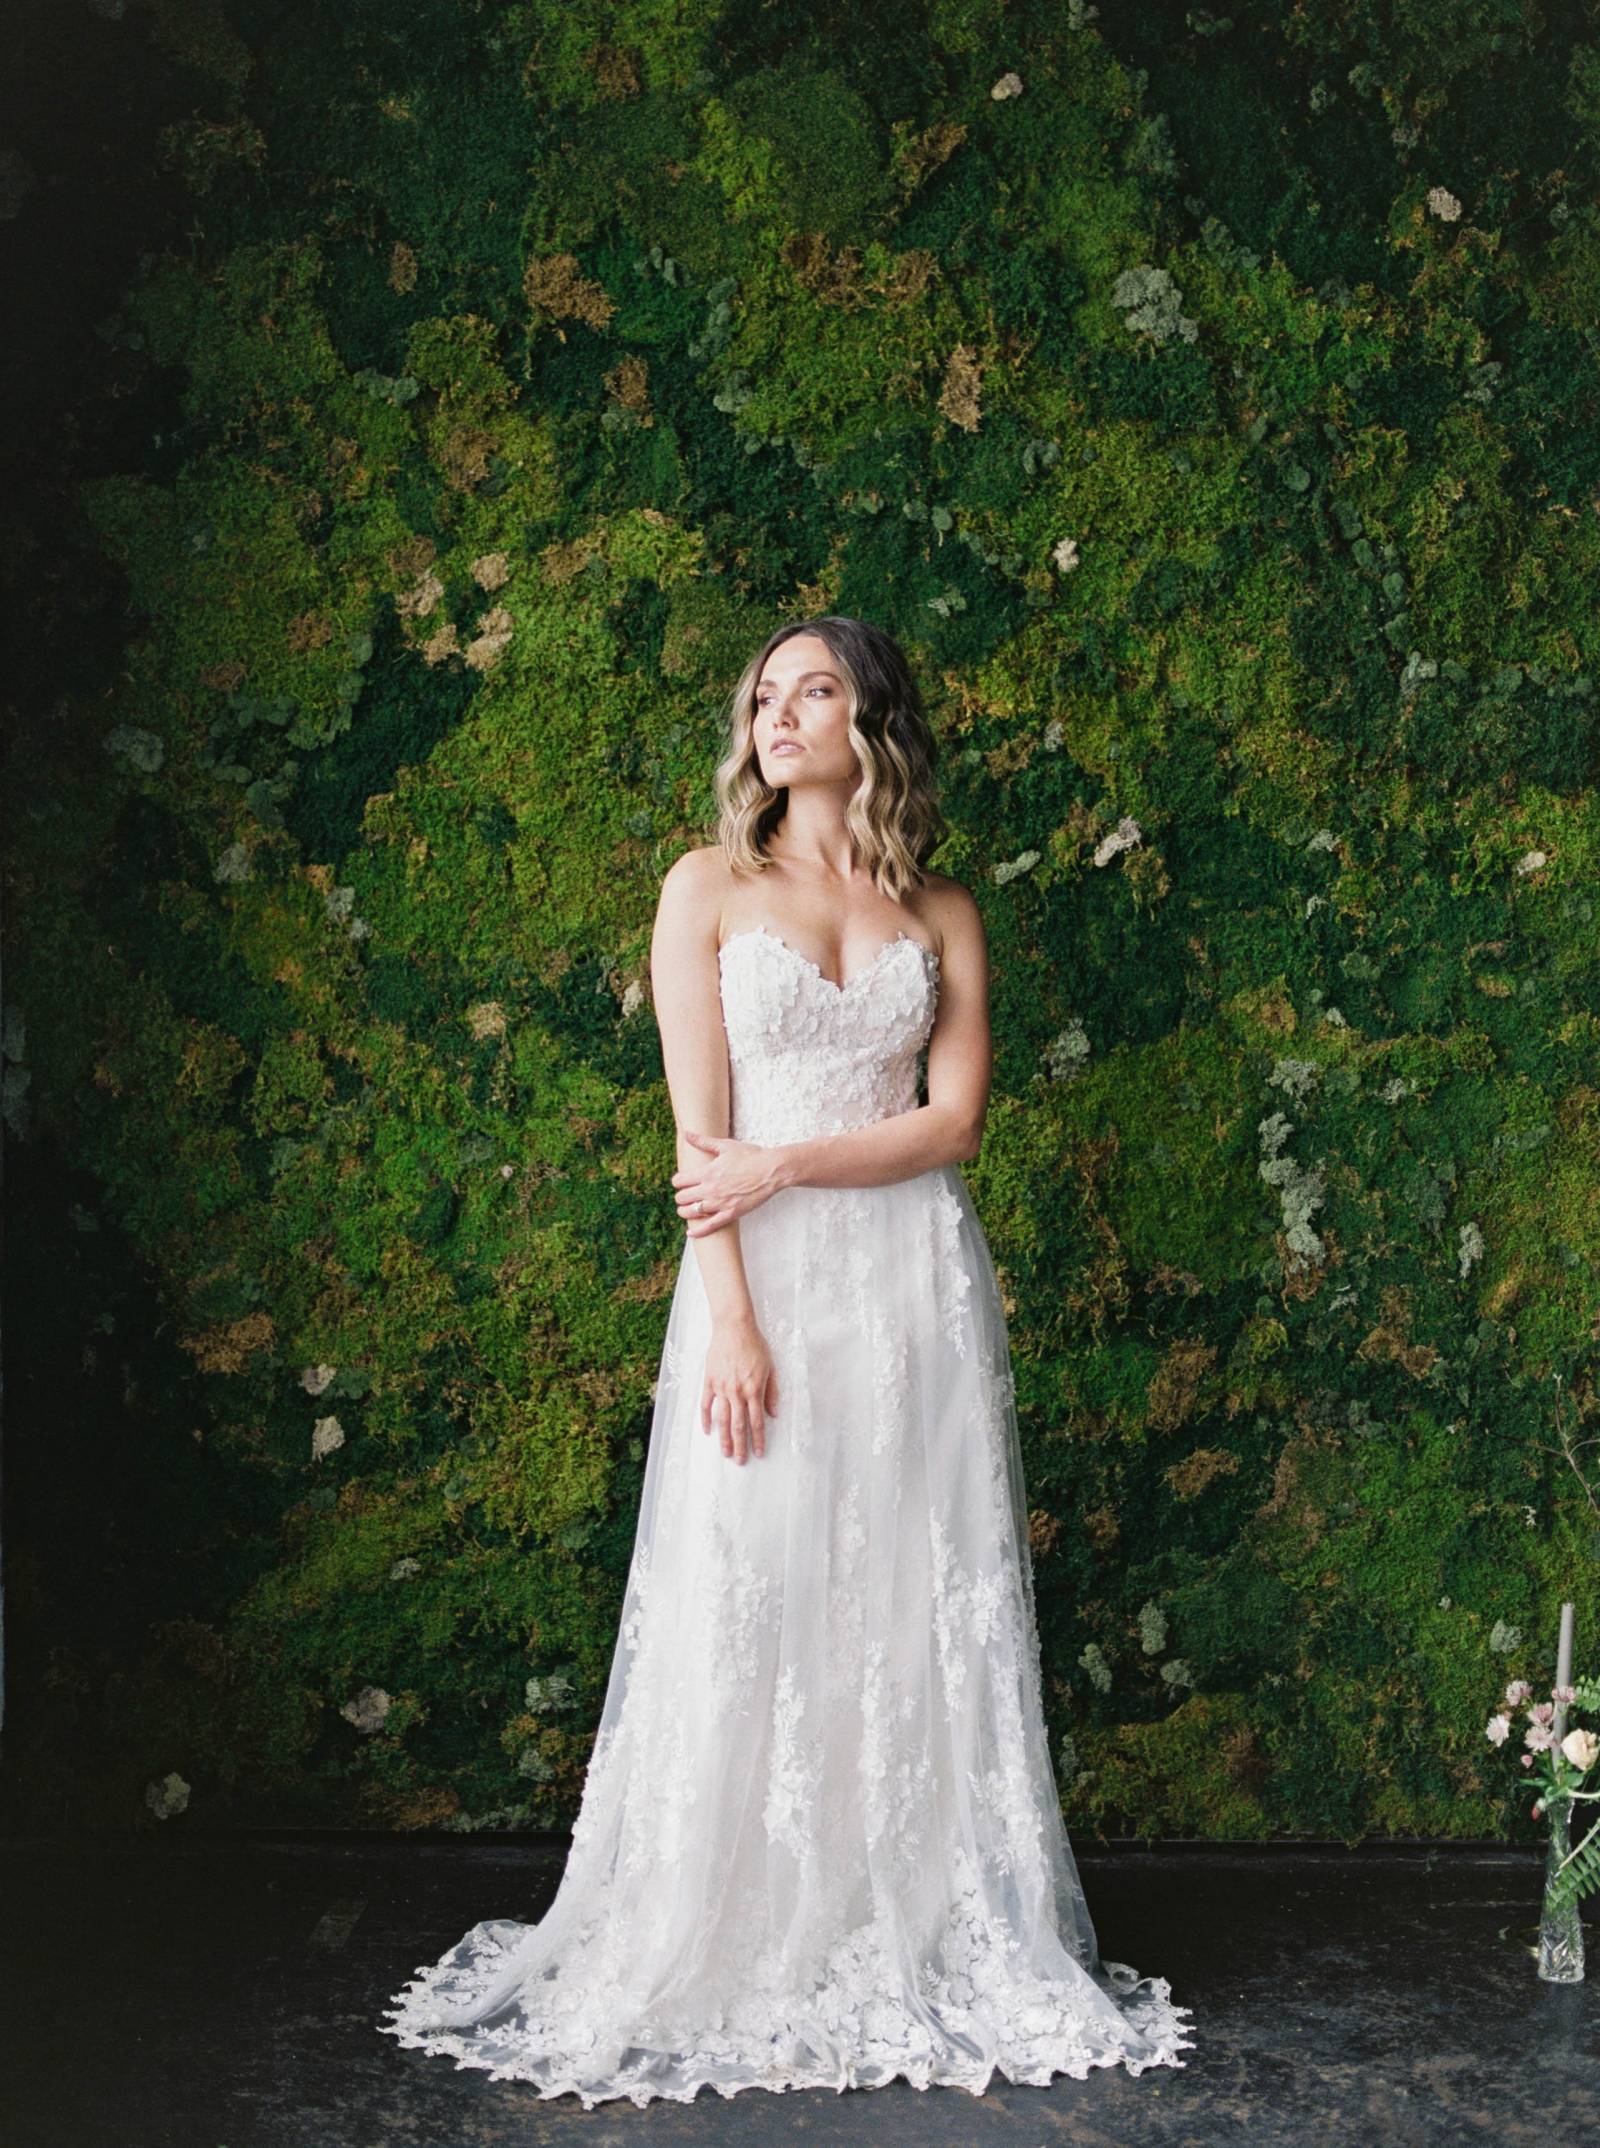 A whimsical micro-wedding editorial inspired by A Midsummer Night's ...